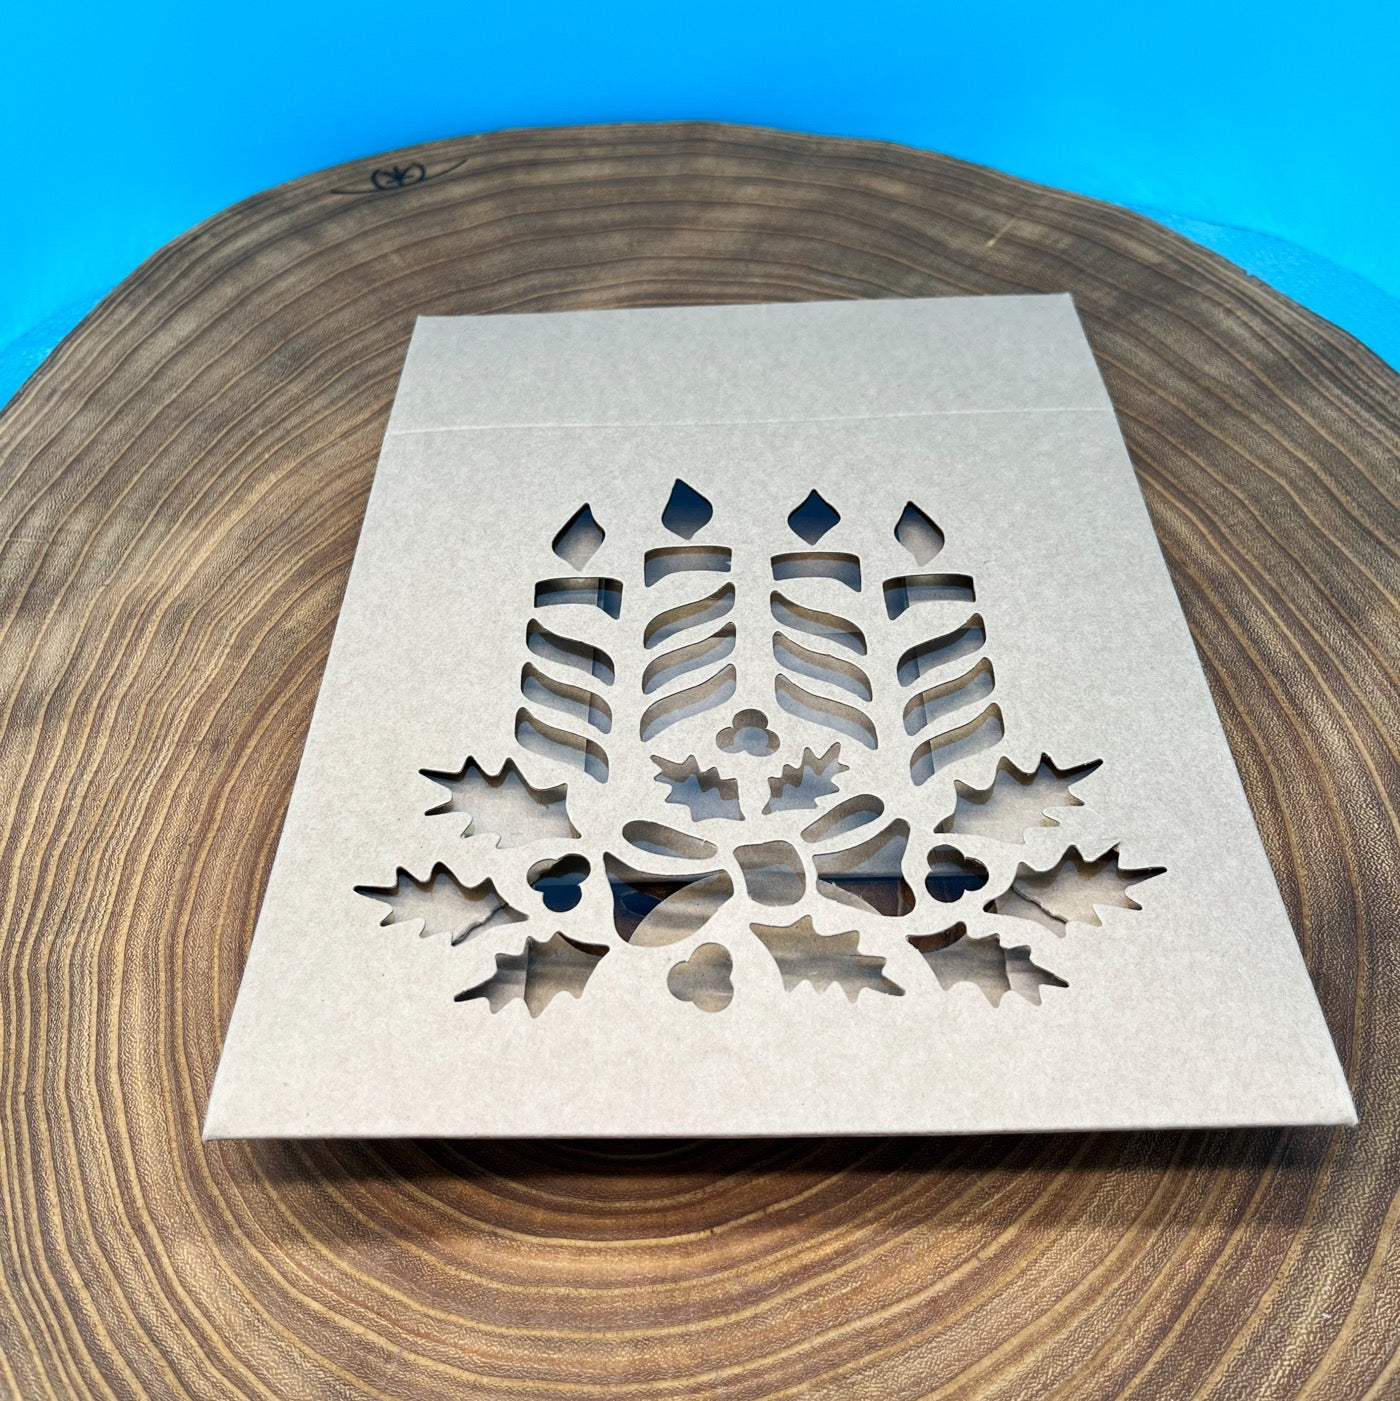 Kraft Pastry Box with Candle Cutout - 8x8x2.5